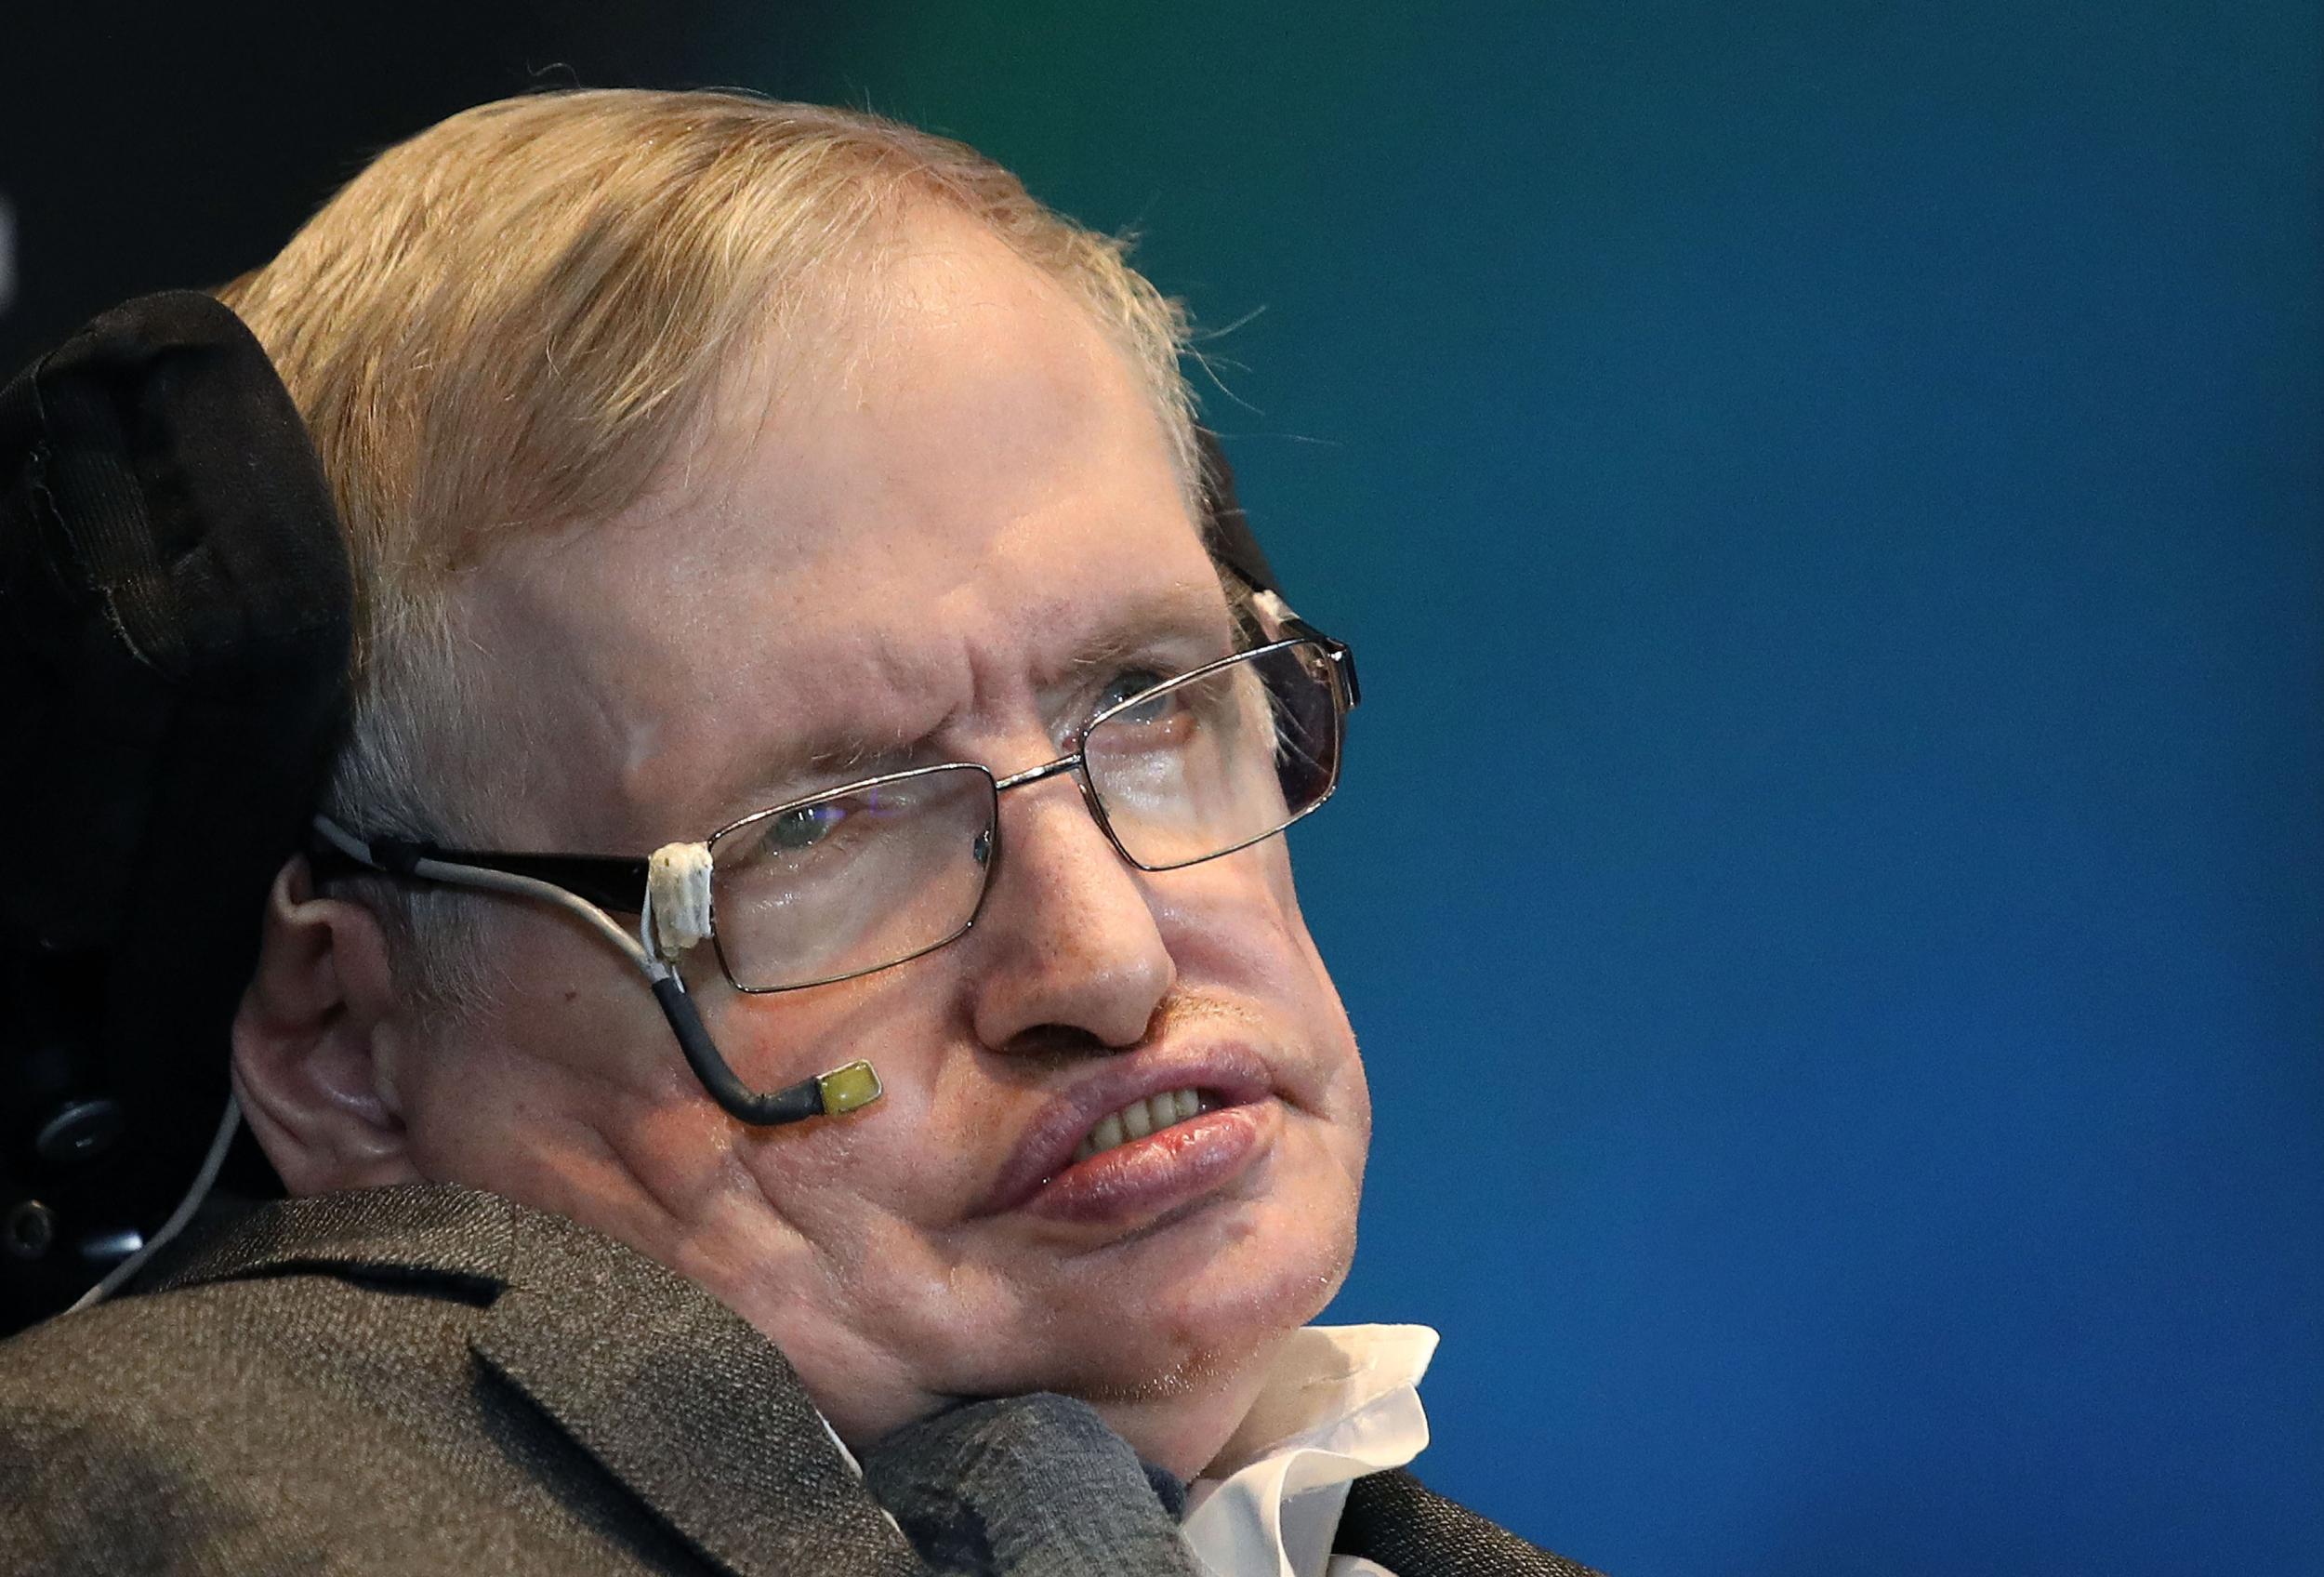 Stephen Hawking attacked the Tories for moving towards privatising NHS and undermining trust in science